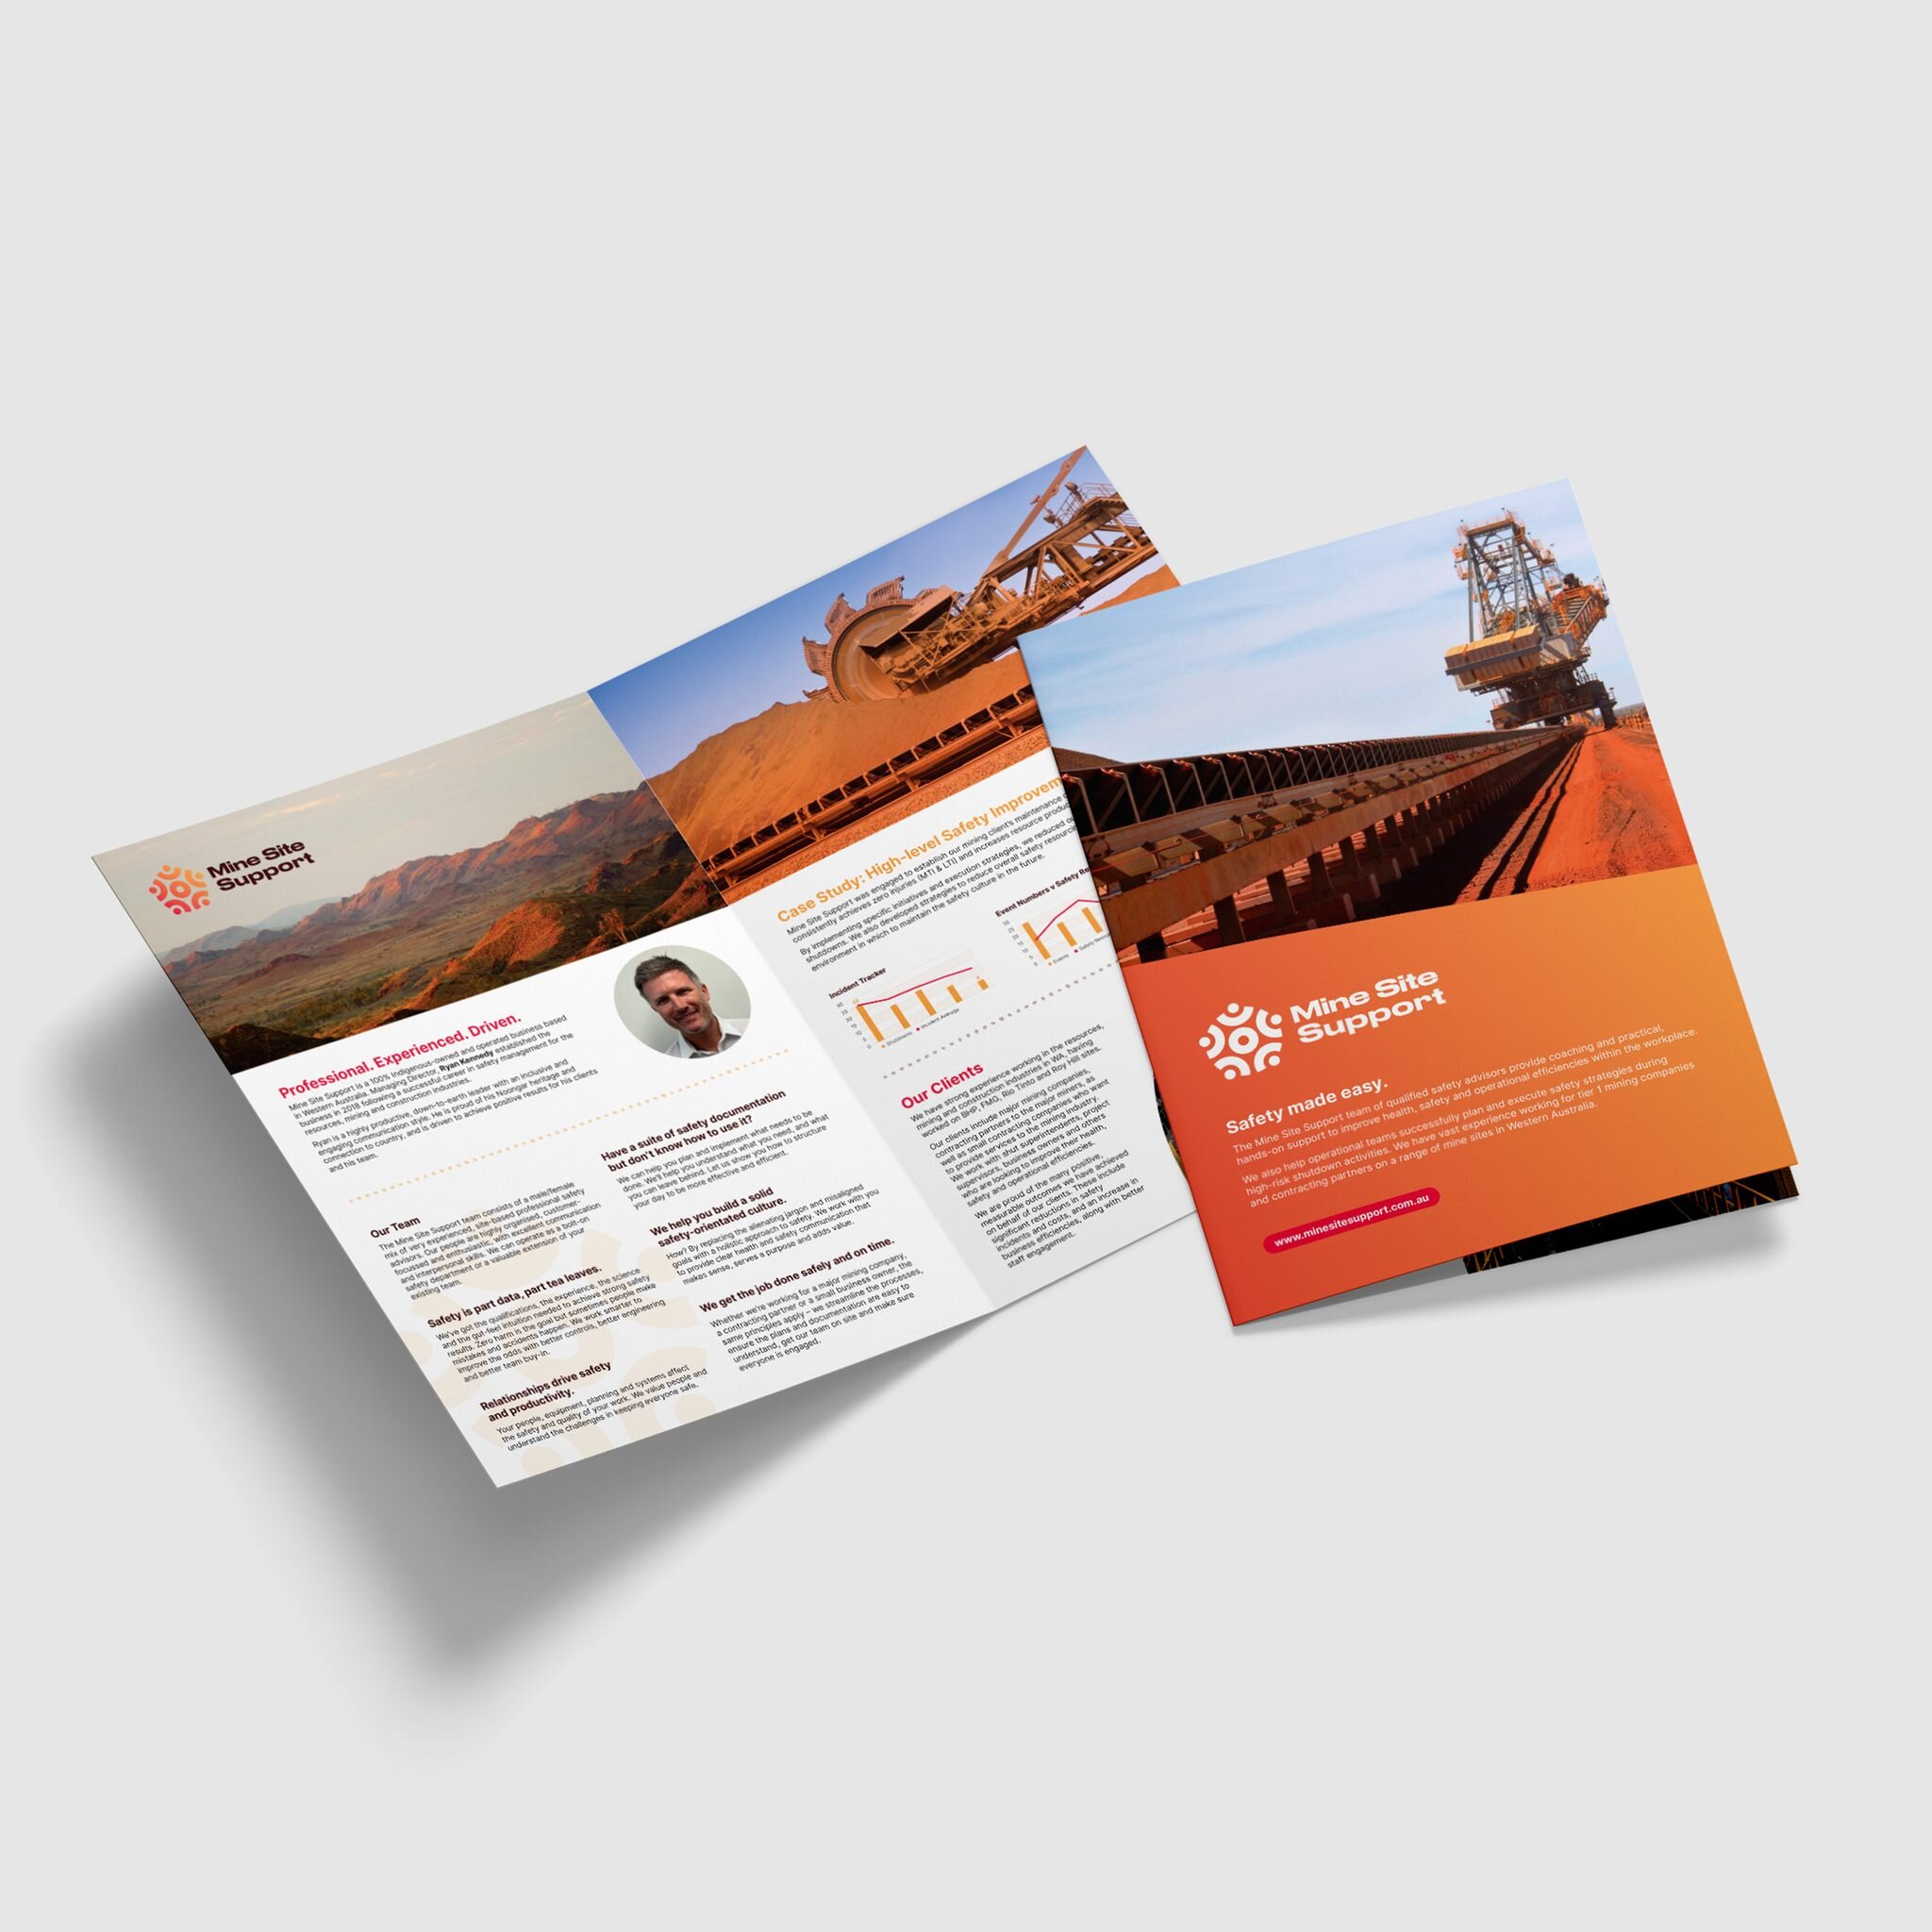 Capability statement 4-page A4 brochure designed for Mine Site Support, an indigenous-owned and operated business providing safety and operational services for tier 1 mining companies and contractors in West Australia.
&bull;
&bull;
&bull;
&bull;
#br